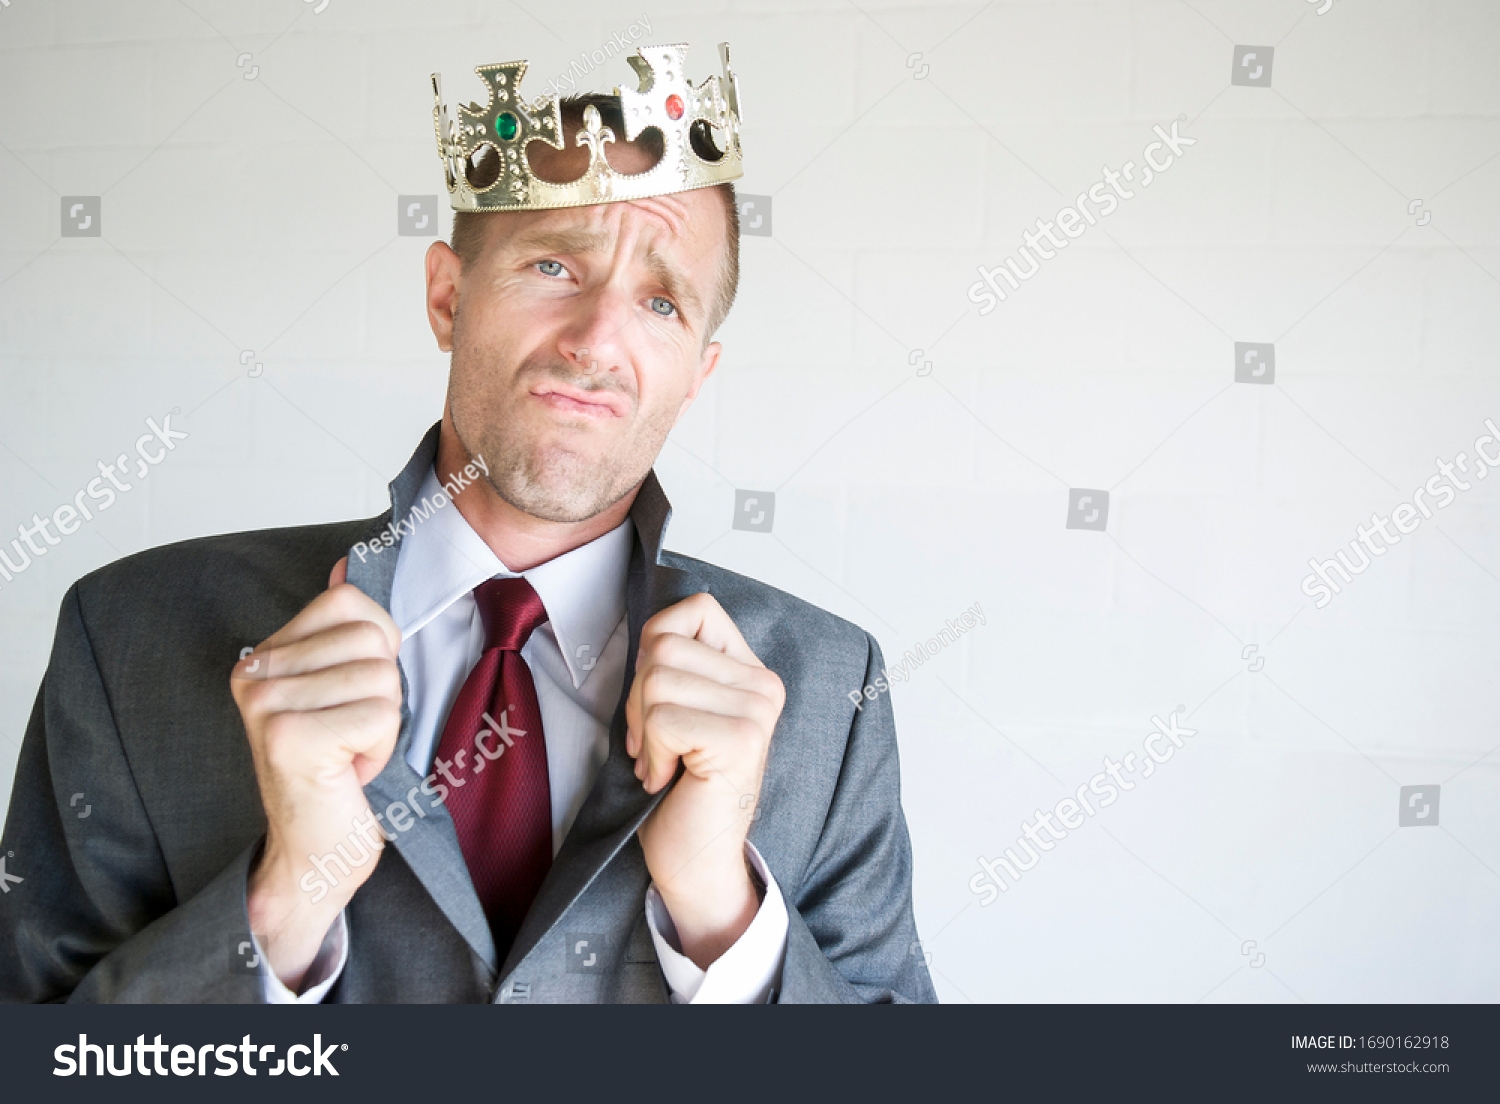 Cocky businessman wearing golden jeweled crown popping his collar with an arrogant expression #1690162918